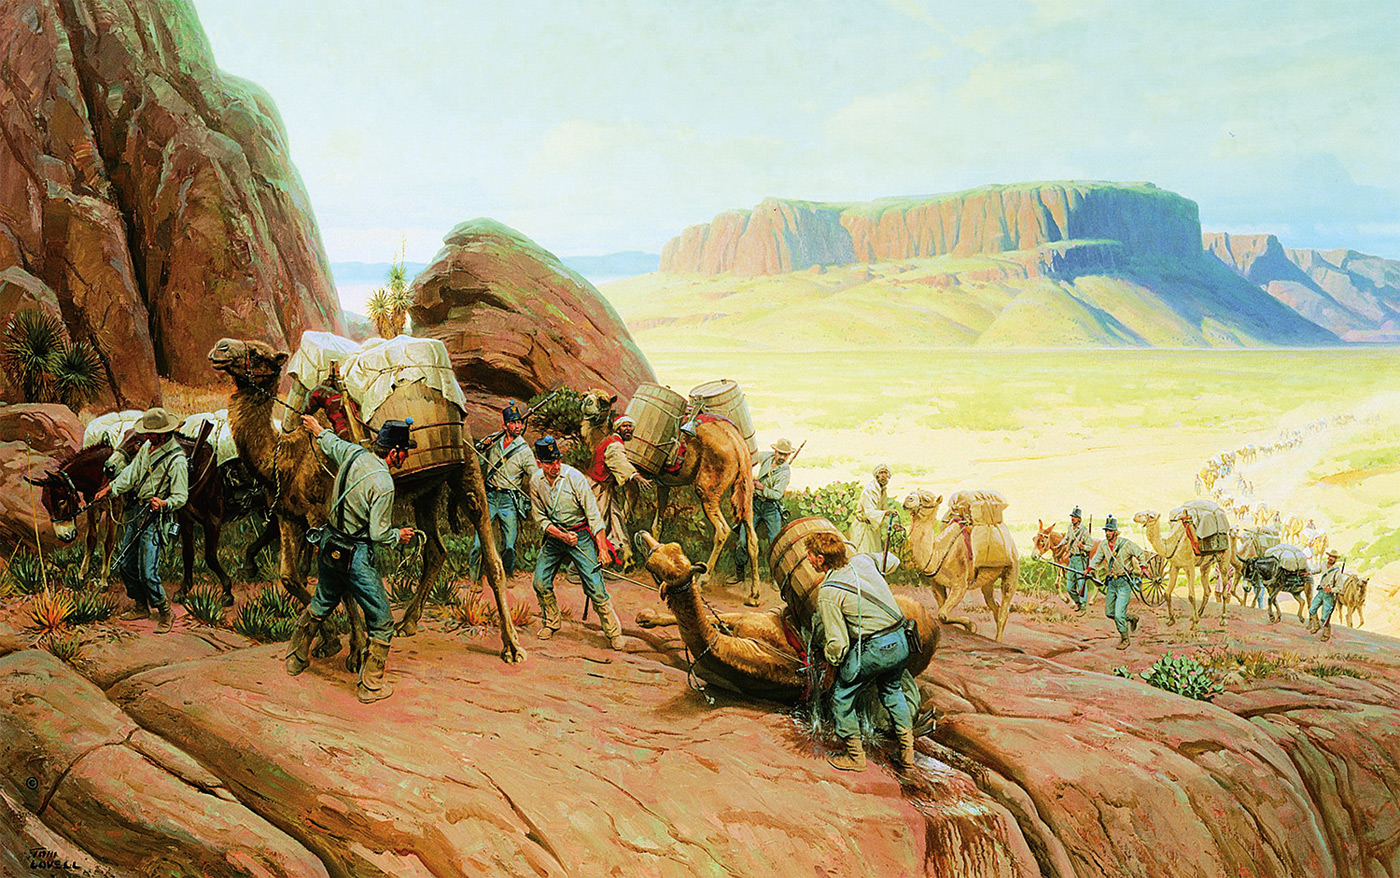 Laden with two wooden barrels of water during a June 1859 US Army camel corps expedition in Southwest Texas, a camel slipped on the smooth rock, and its fall broke one of the precious barrels. The incident was illustrated by artist Thomas Lovell, who included Hi Jolly in the scene, just above the fallen camel’s head.